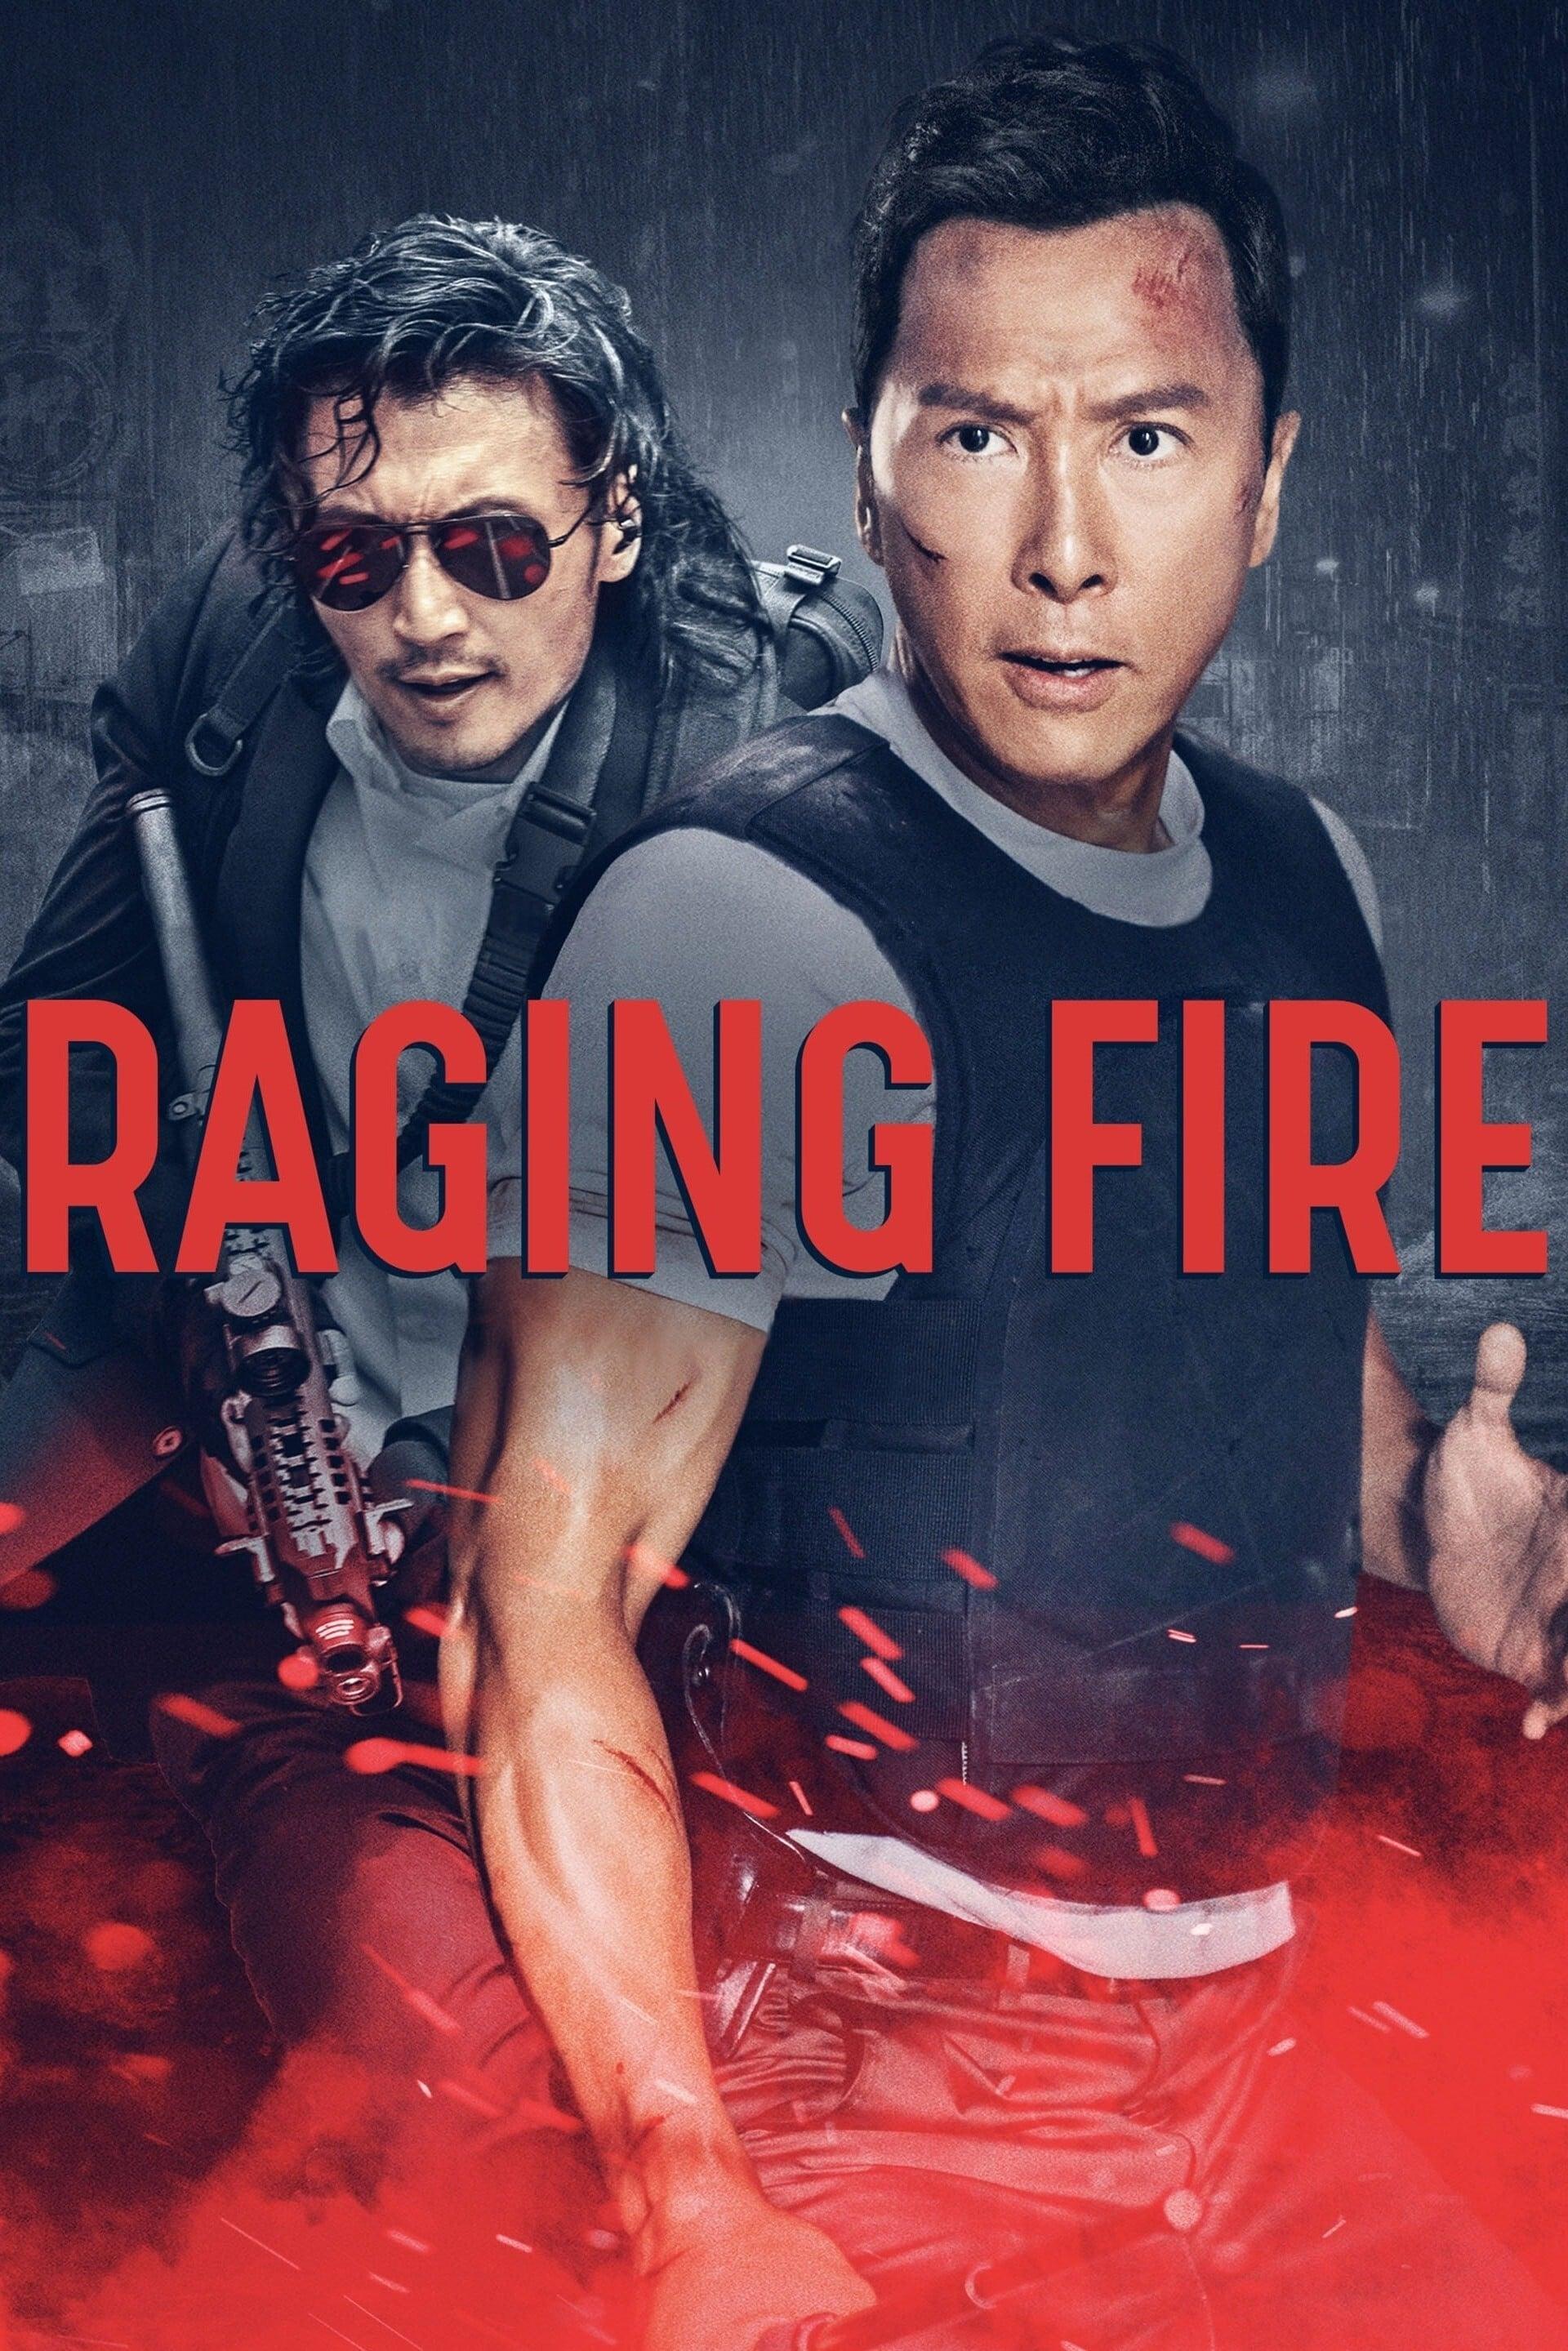 Raging Fire poster